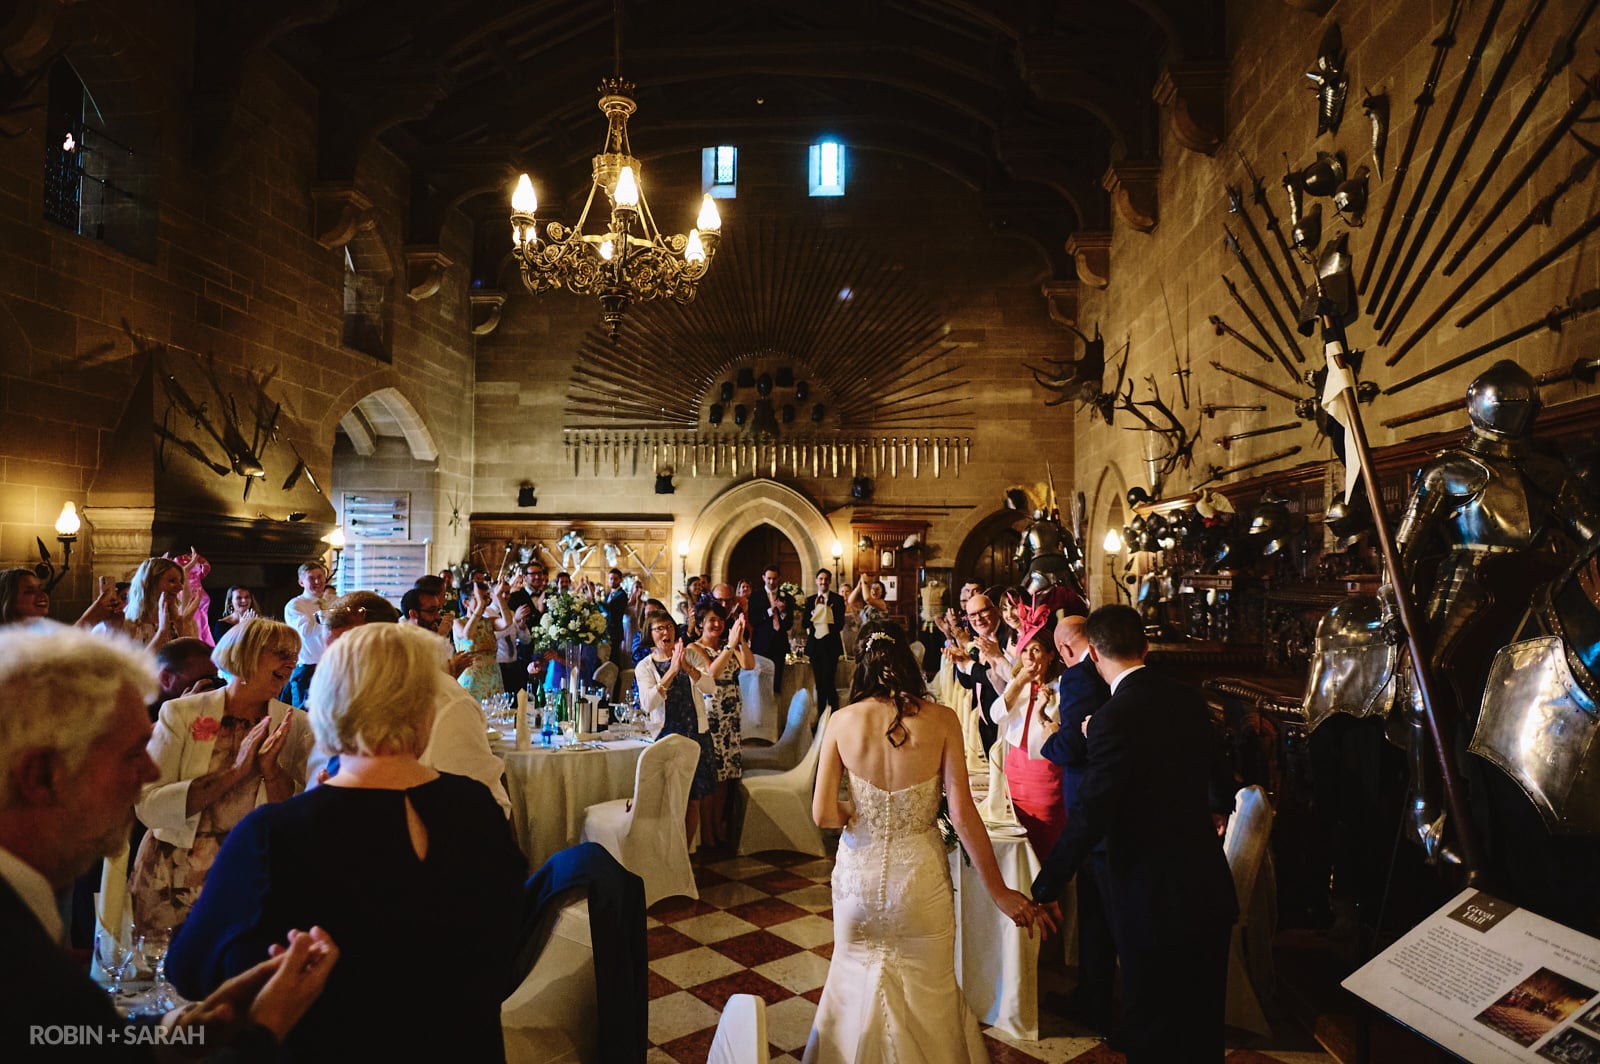 Bride and groom enter Great Hall at Warwick Castle as guests clap and cheer